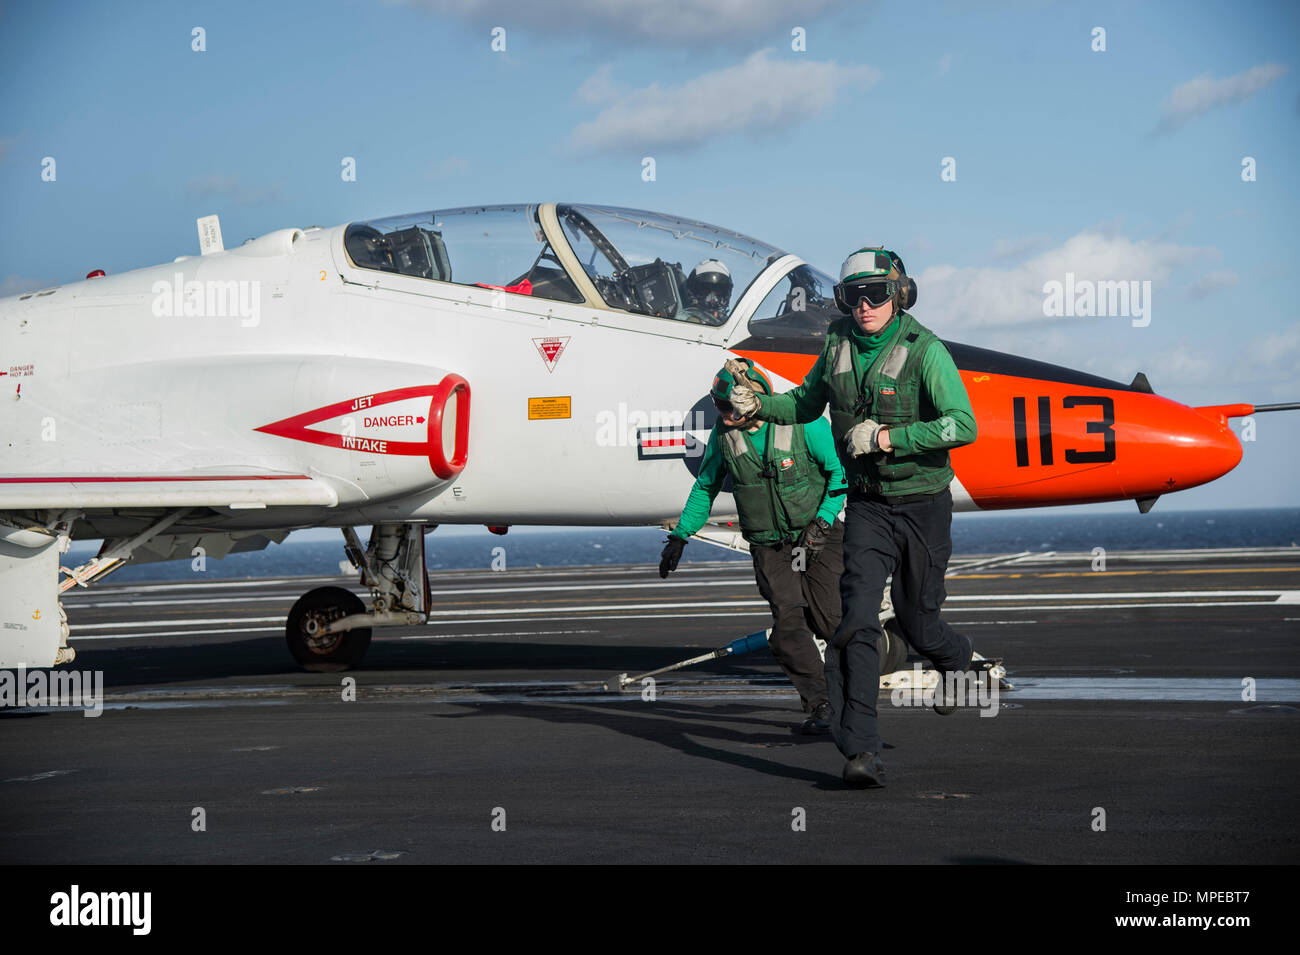 170210-N-OS569-097  ATLANTIC OCEAN (Feb. 10, 2017) Aviation Boatswain’s Mate Airman (Equipment), Bradley Stine, right, and Aviation Boatswain’s Mate 2nd Class (Equipment) Tyler Cantrall, complete their preflight inspection on the arresting gear of a T-45C Goshawk assigned to Carrier Training Wing (CTW) 1 prepares to launch from the flight deck of the aircraft carrier USS Dwight D. Eisenhower (CVN 69) (Ike). Ike is currently conducting aircraft carrier qualifications during the sustainment phase of the Optimized Fleet Response Plan (OFRP). (U.S. Navy photo by Mass Communication Specialist Seama Stock Photo